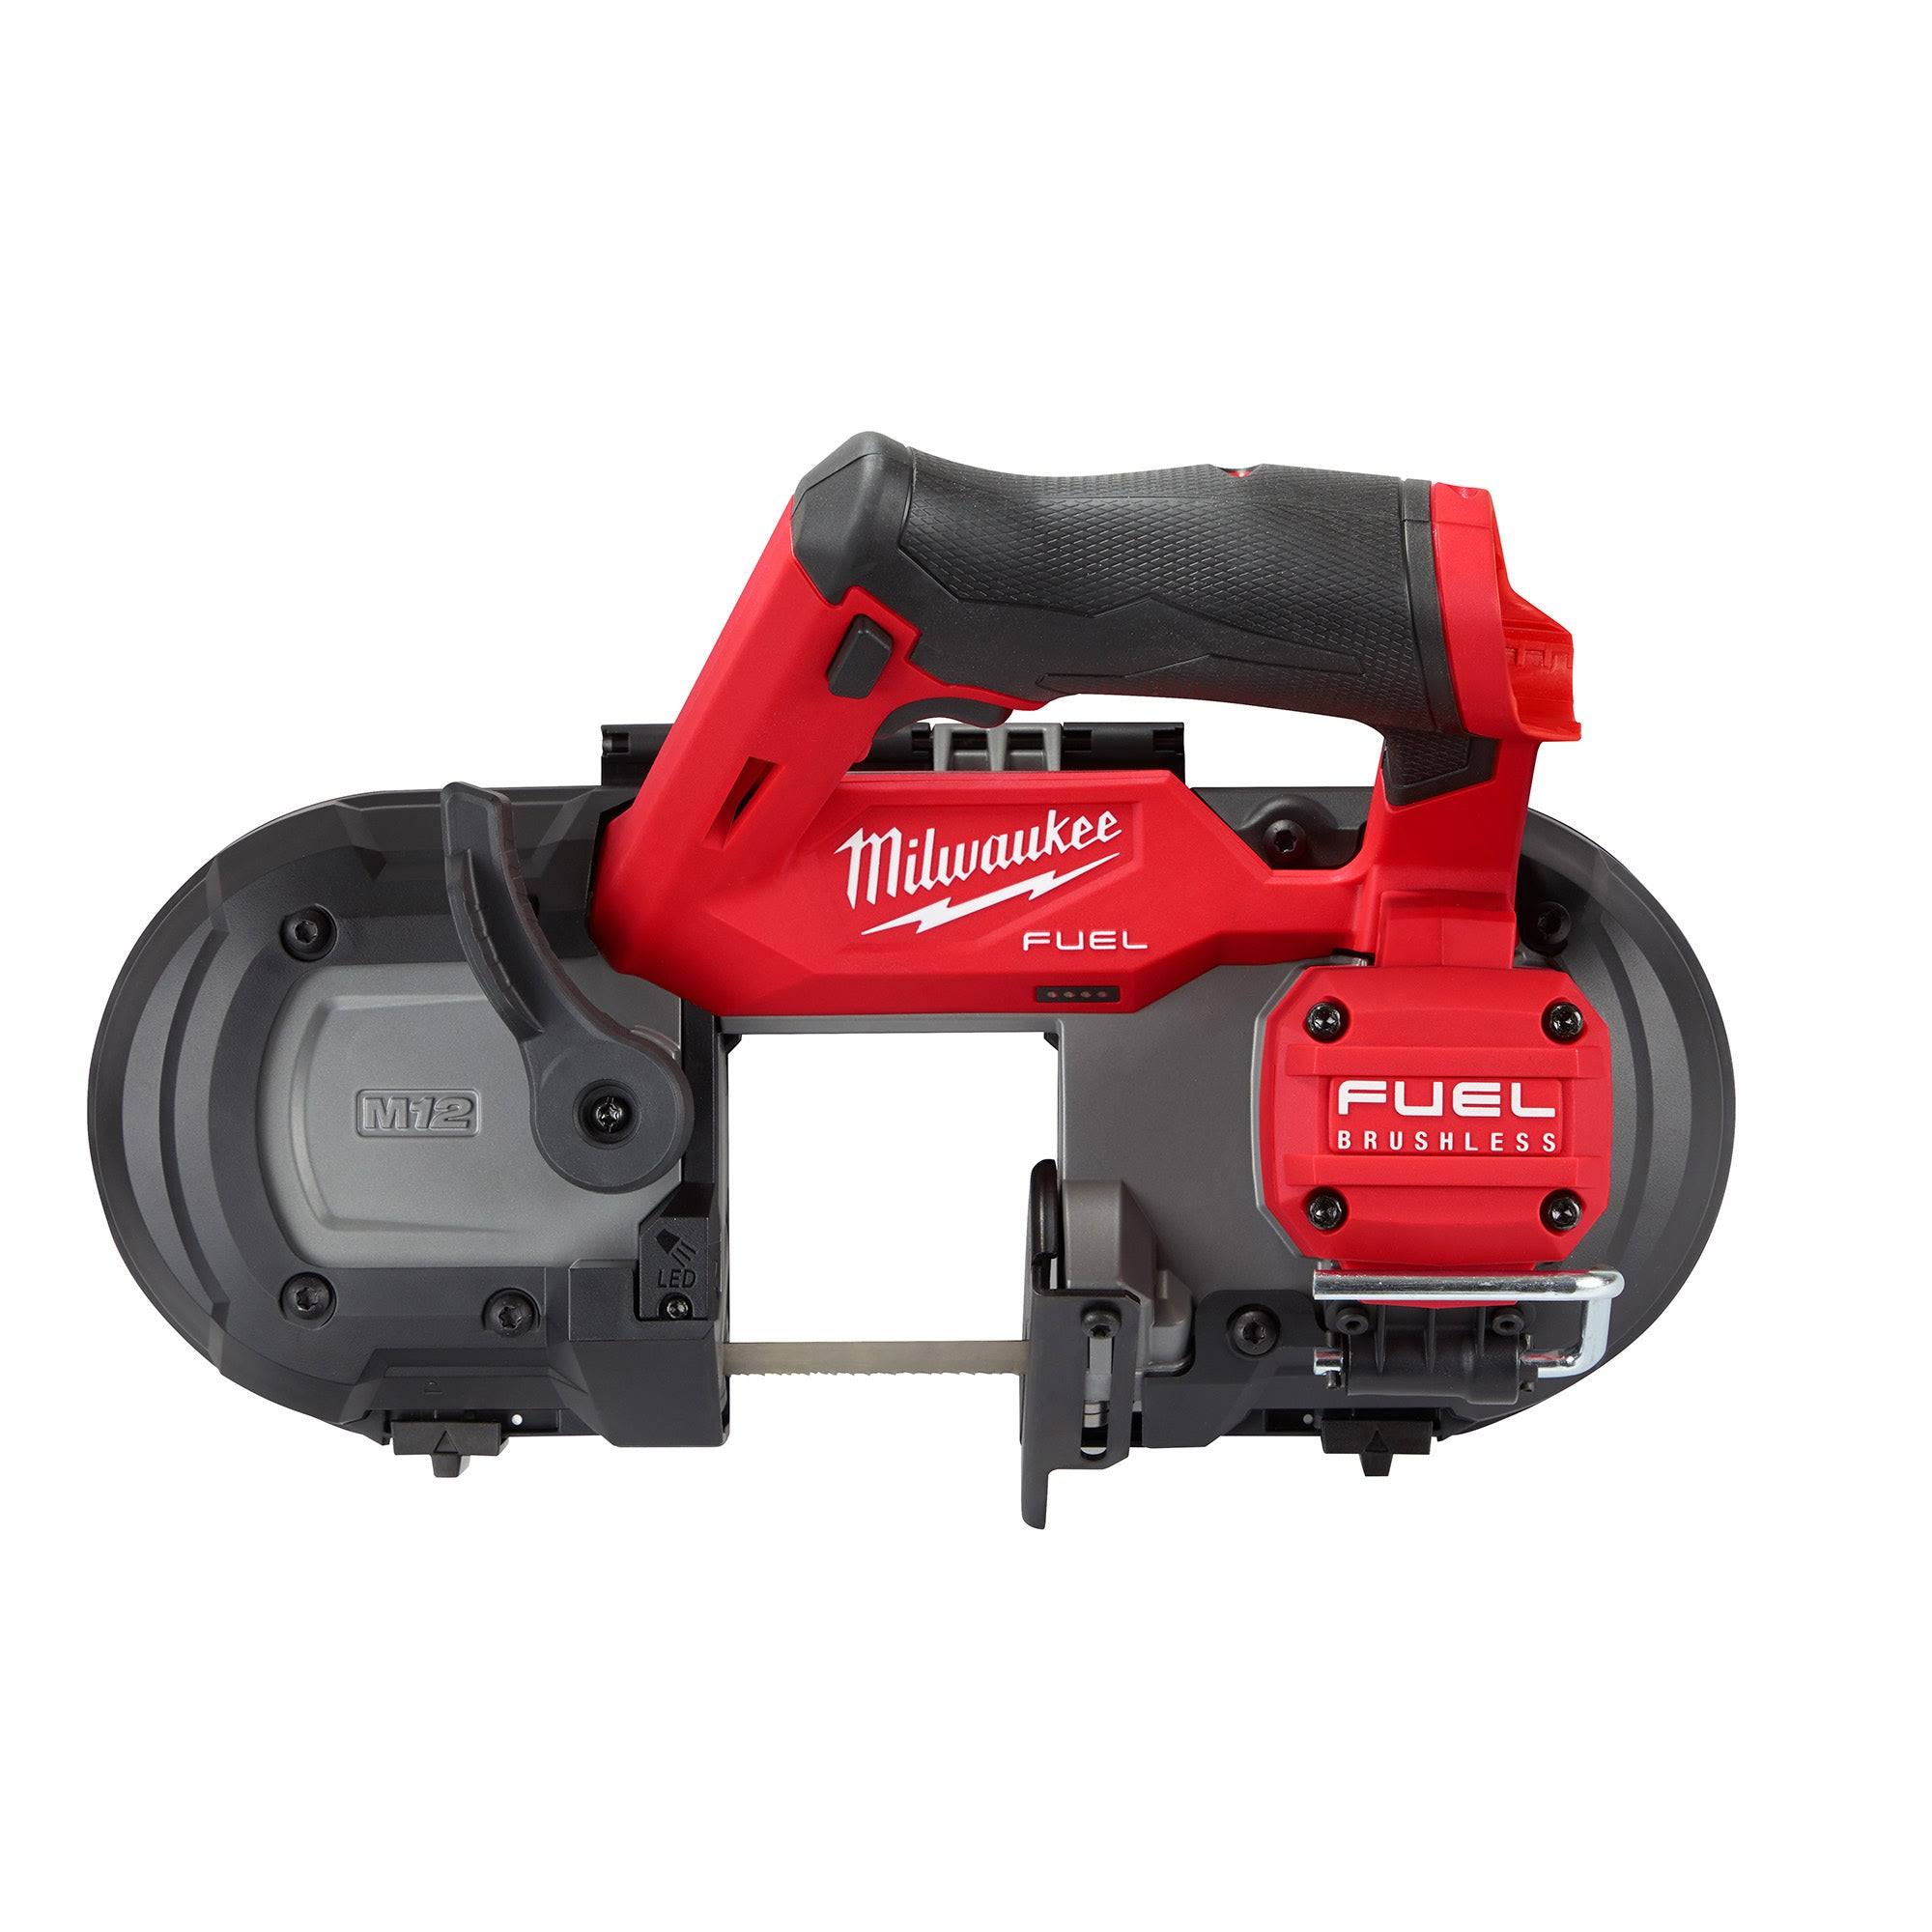 Milwaukee 2529-20 M12 Fuel Compact Band Saw (Tool Only)